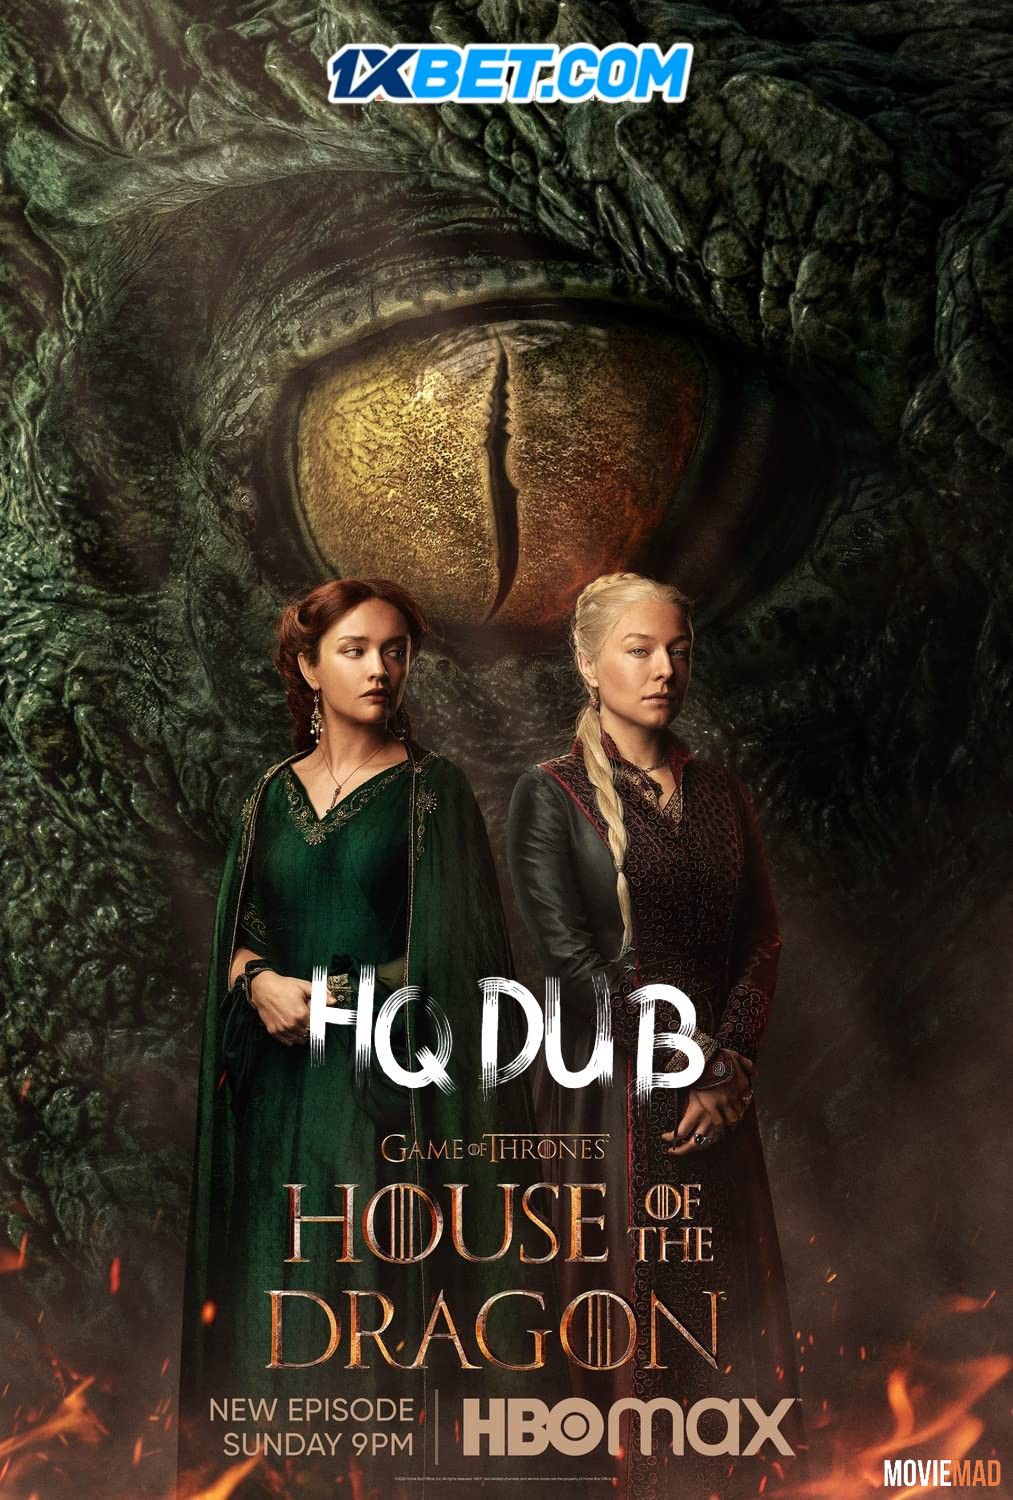 House Of The Dragon S01E08 (2022) Hindi (Voice Over) Dubbed HBOMAX HDRip 1080p 720p 480p